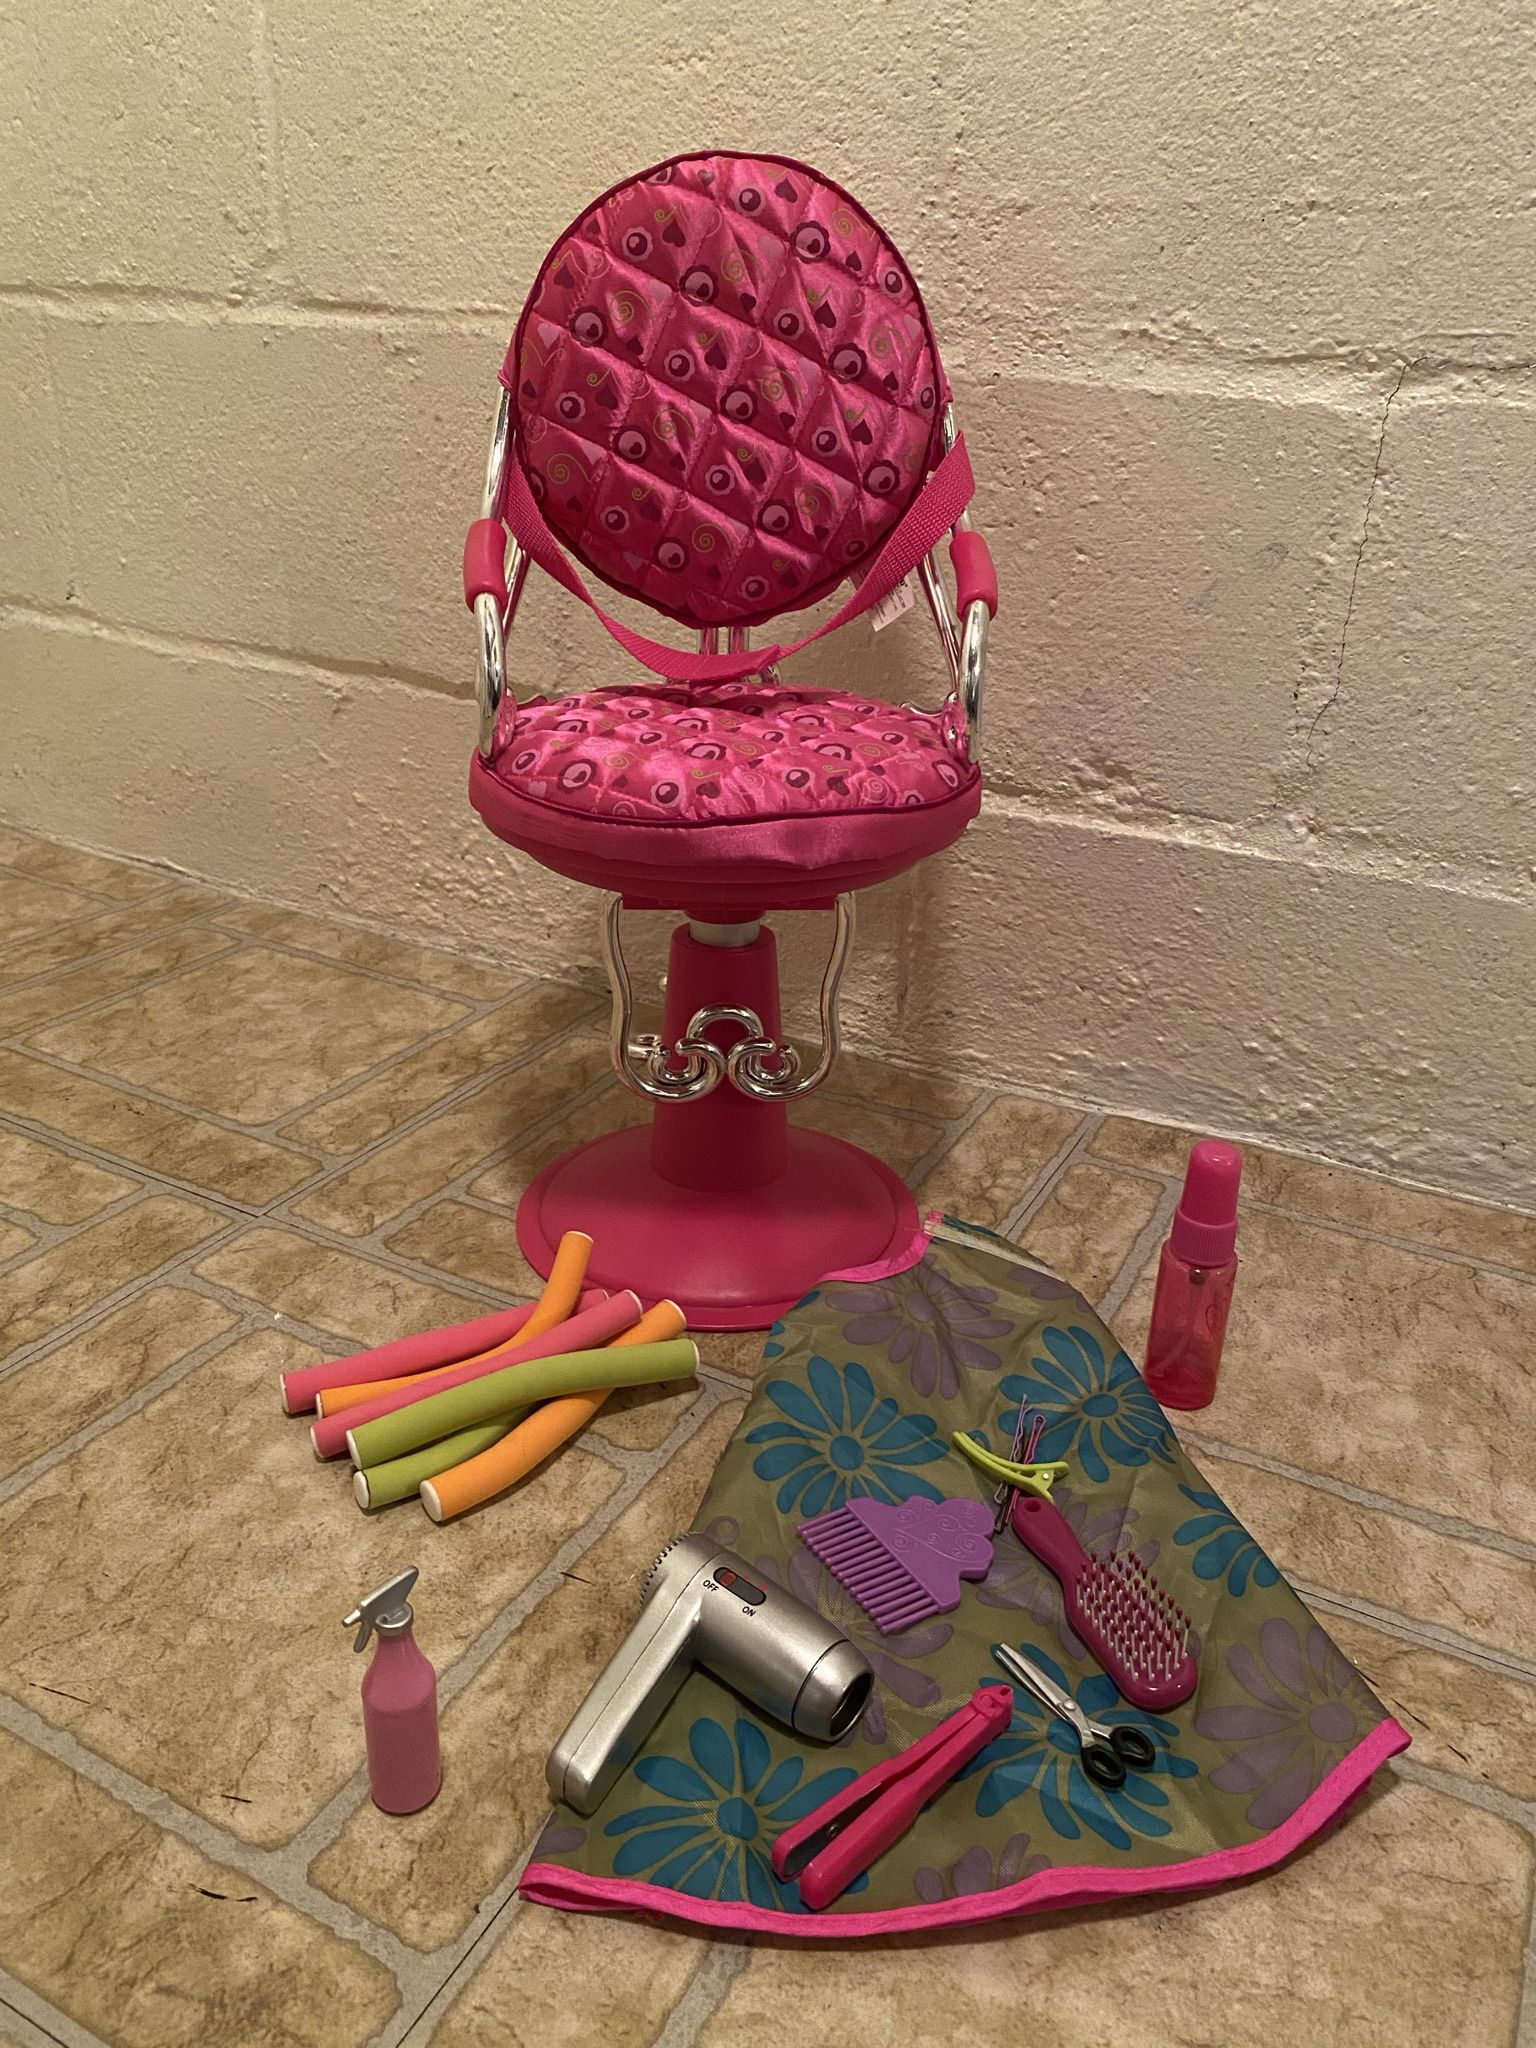 Hair Salon Chair with Accessories for American Girl or Our Generation Doll